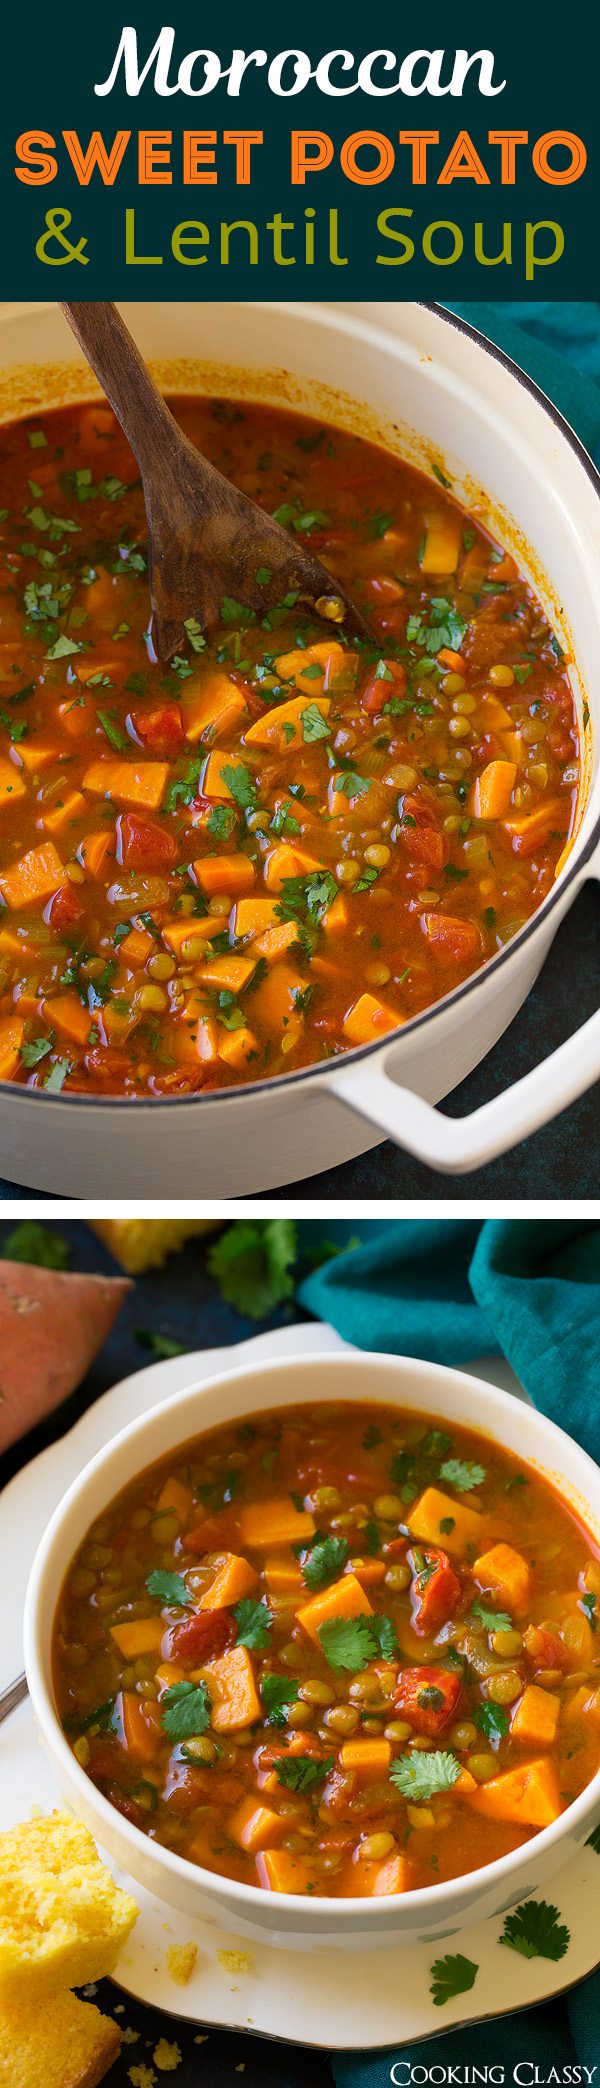 Sweet Potato Soup (Healthy Moroccan Lentil) - Cooking Classy